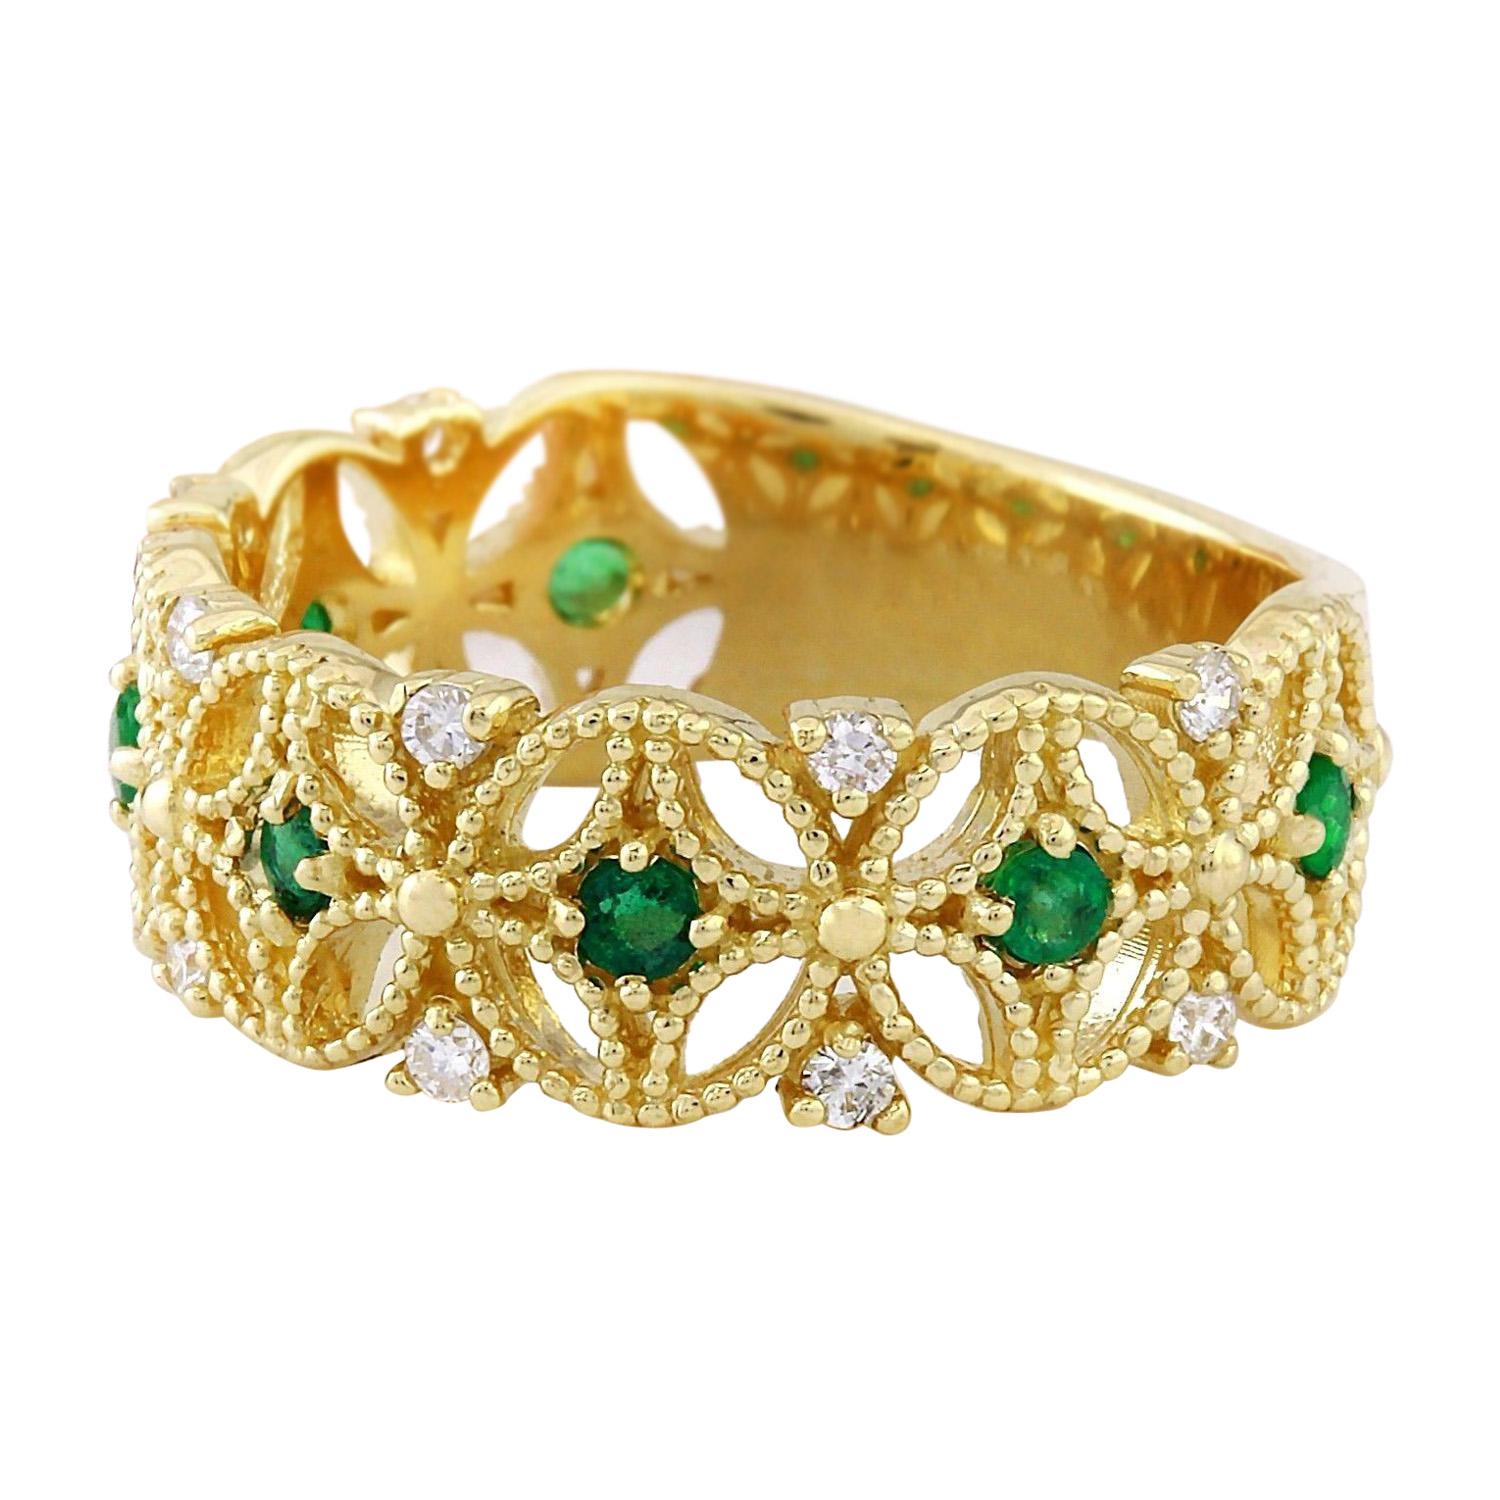 0.45 Carat Natural Emerald 14K Solid Yellow Gold Diamond Ring
 Item Type: Ring
 Item Style: Band
 Material: 14K Yellow Gold
 Mainstone: Emerald
 Stone Color: Green
 Stone Weight: 0.30 Carat
 Stone Shape: Round
 Stone Creation Method: Natural
 Stone